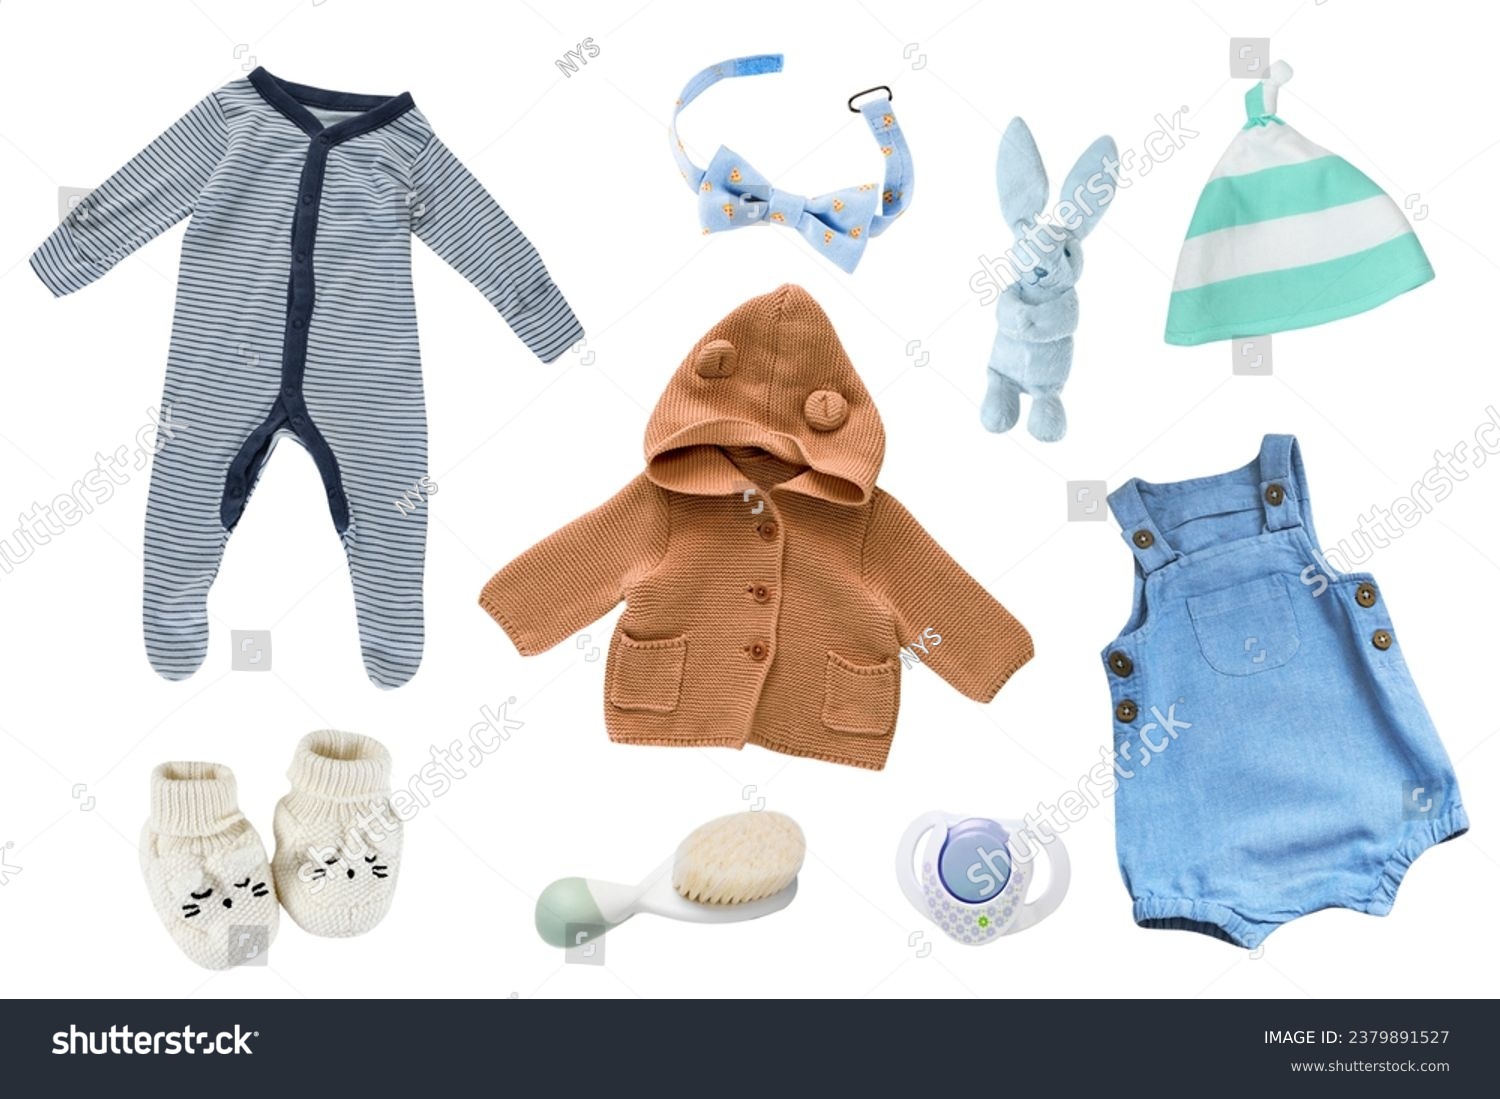 Baby boy clothes set isolated, male child clothing on white. Infant wear, colorful outfit.Kid's fashion. #2379891527